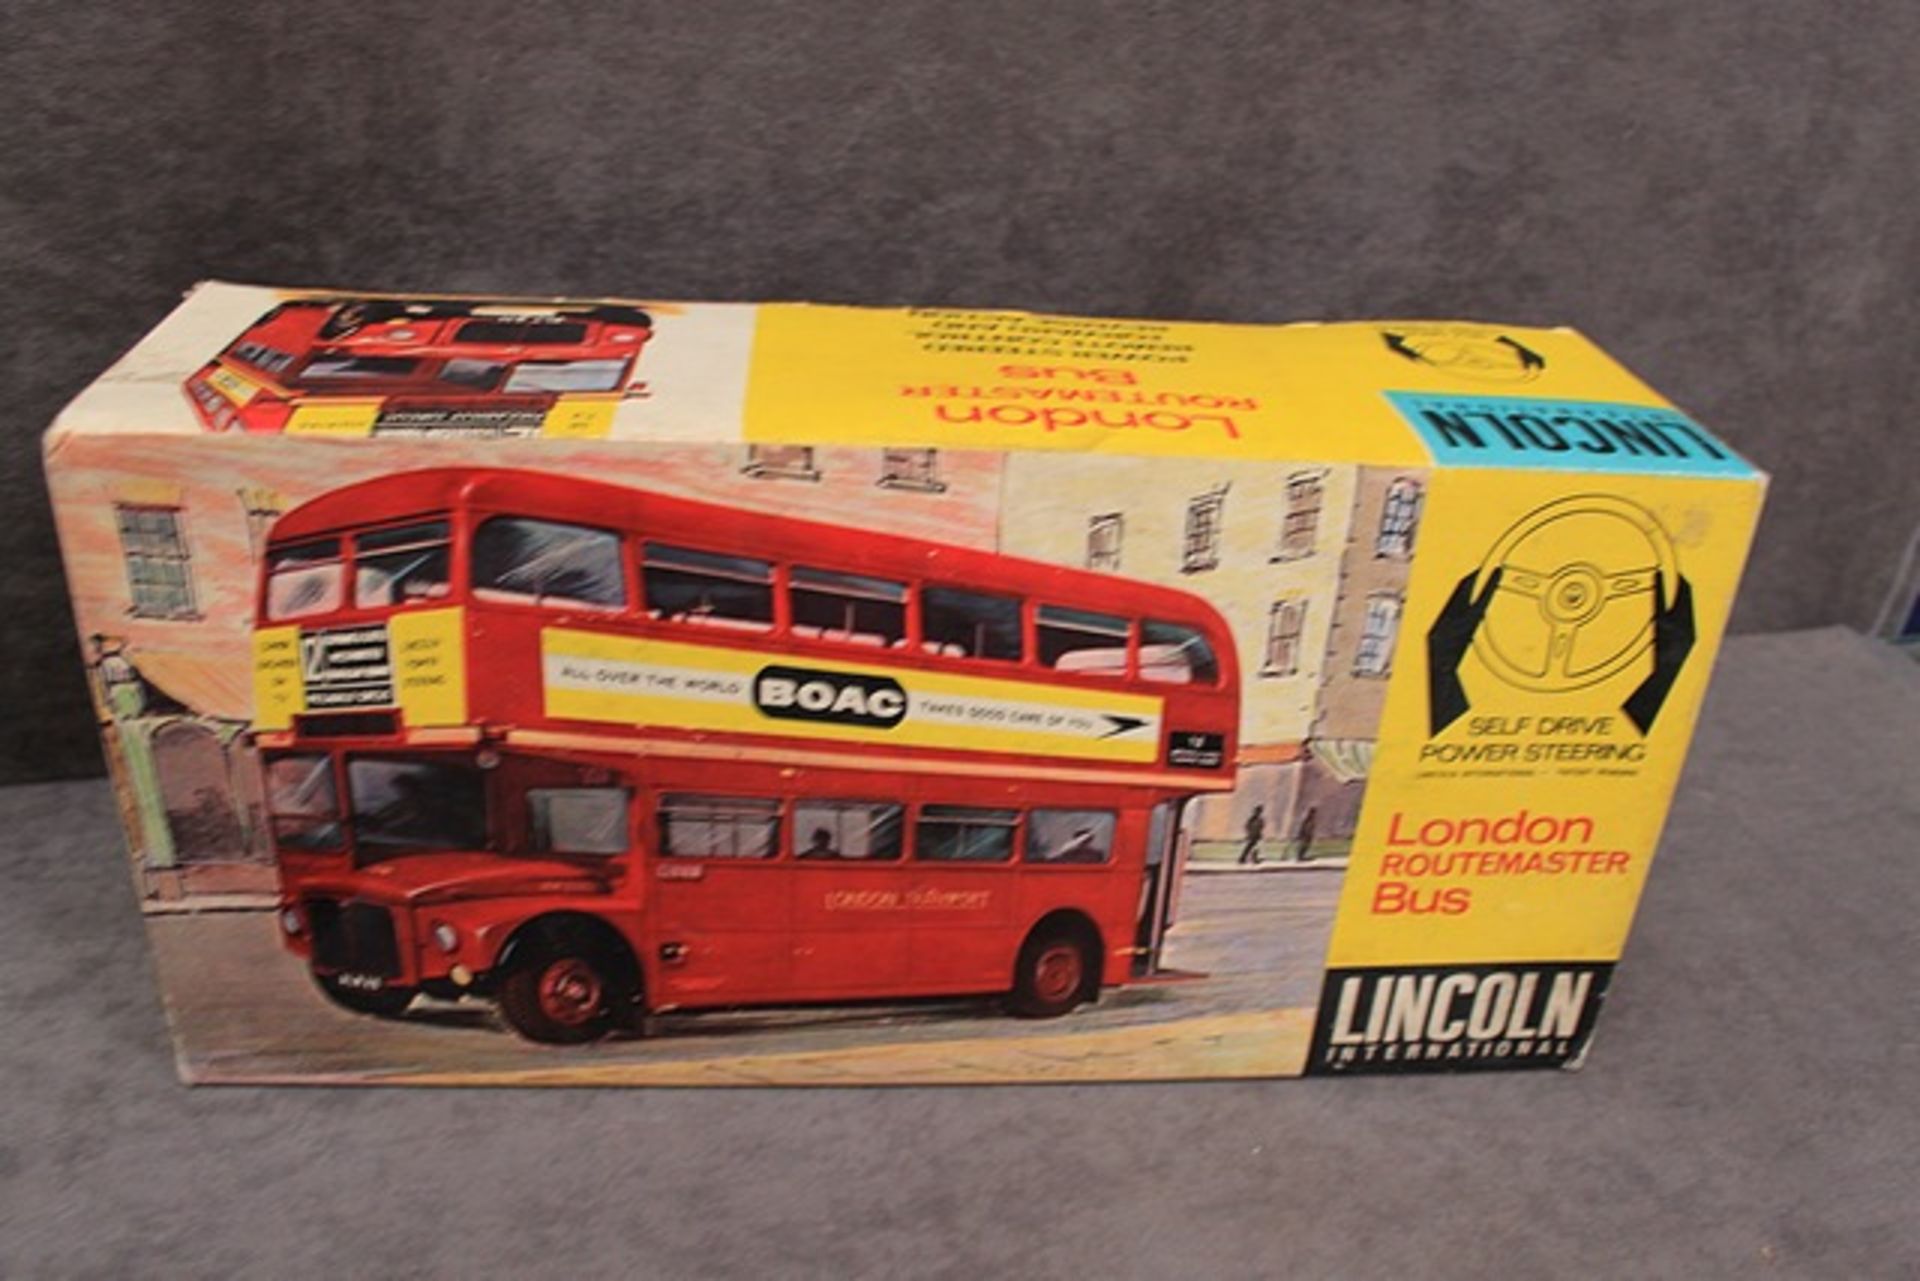 Rare Lincoln International No.7103 London Routemaster Bus Battery Operated made in Hong Kong in box - Image 2 of 2